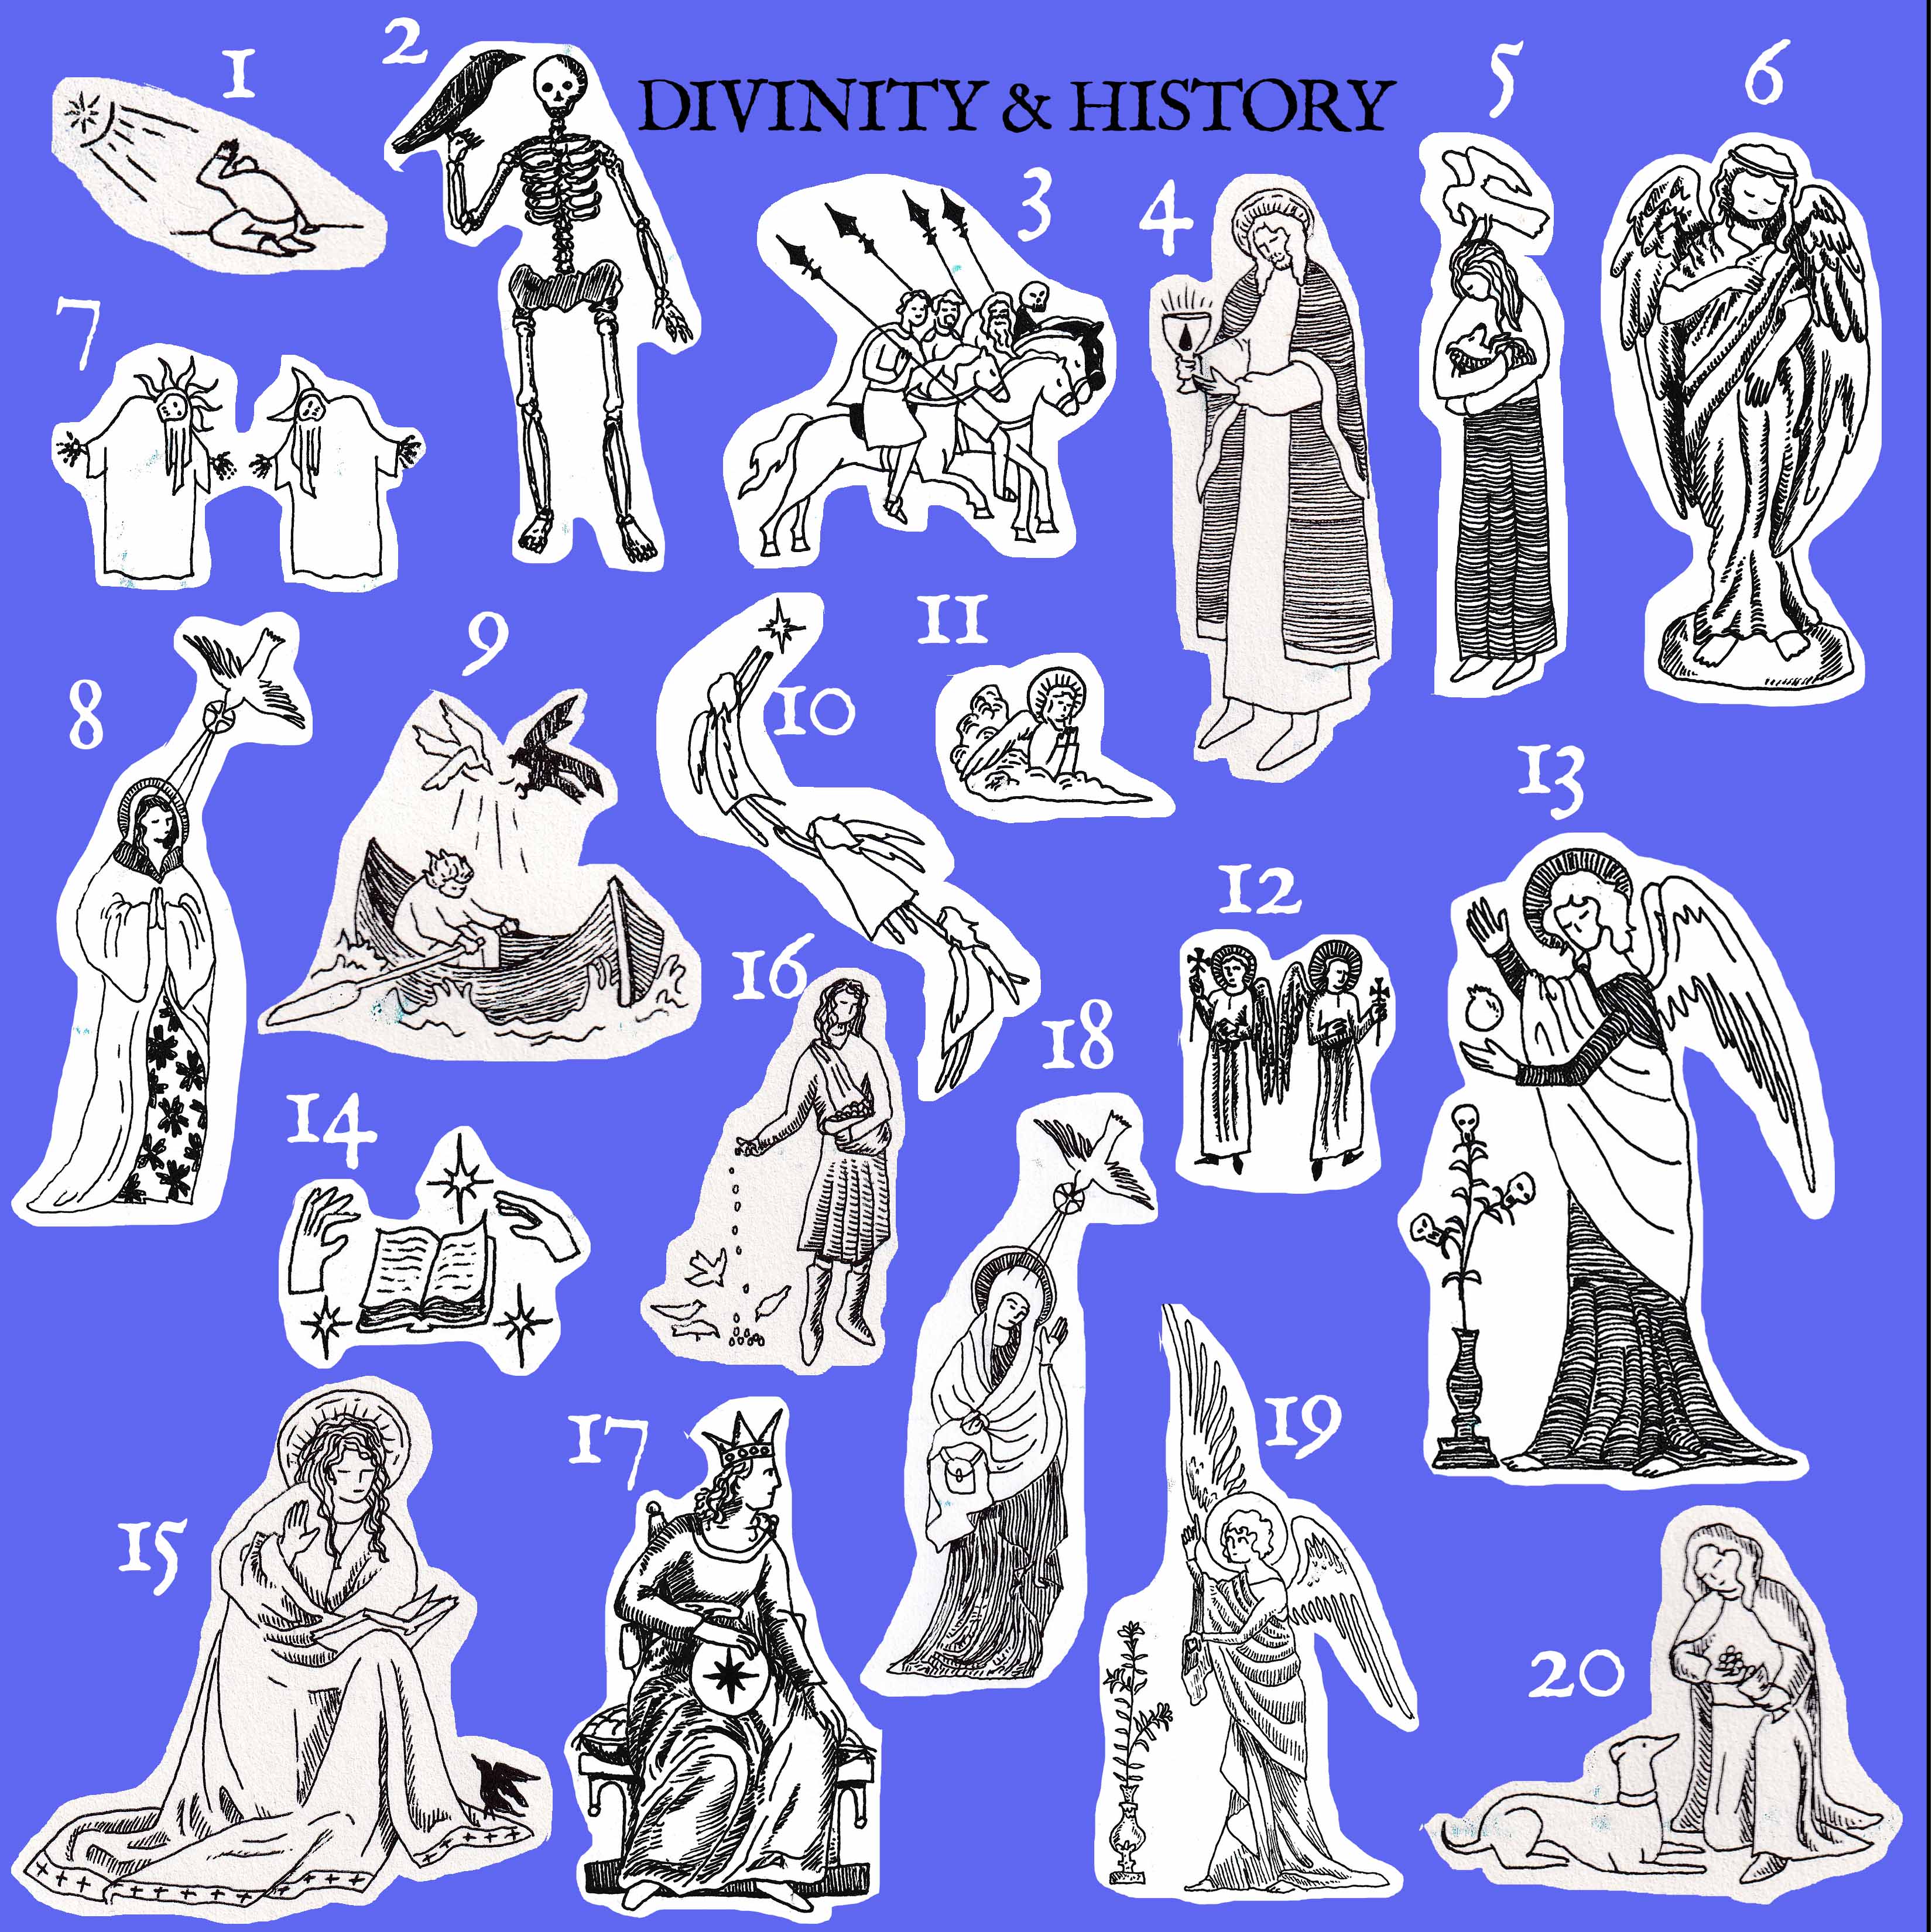 
01-judgment, 02-alchemical skeleton, 03-Calvary of life, 04-blood of christ<br>
05-animal lover, 06-angel statue, 07-sun and moon, 08-flower saint, 09-divine journey<br>
10-three angels, 11-small angel, 12- medieval angels, 13-angel of death<br>
14-magic book, 15-saint reading to bird, 16-feeding the birds, 17-divine counsel<br>
18-divine messages, 19-angel of life, 20-feeding the pooch 
